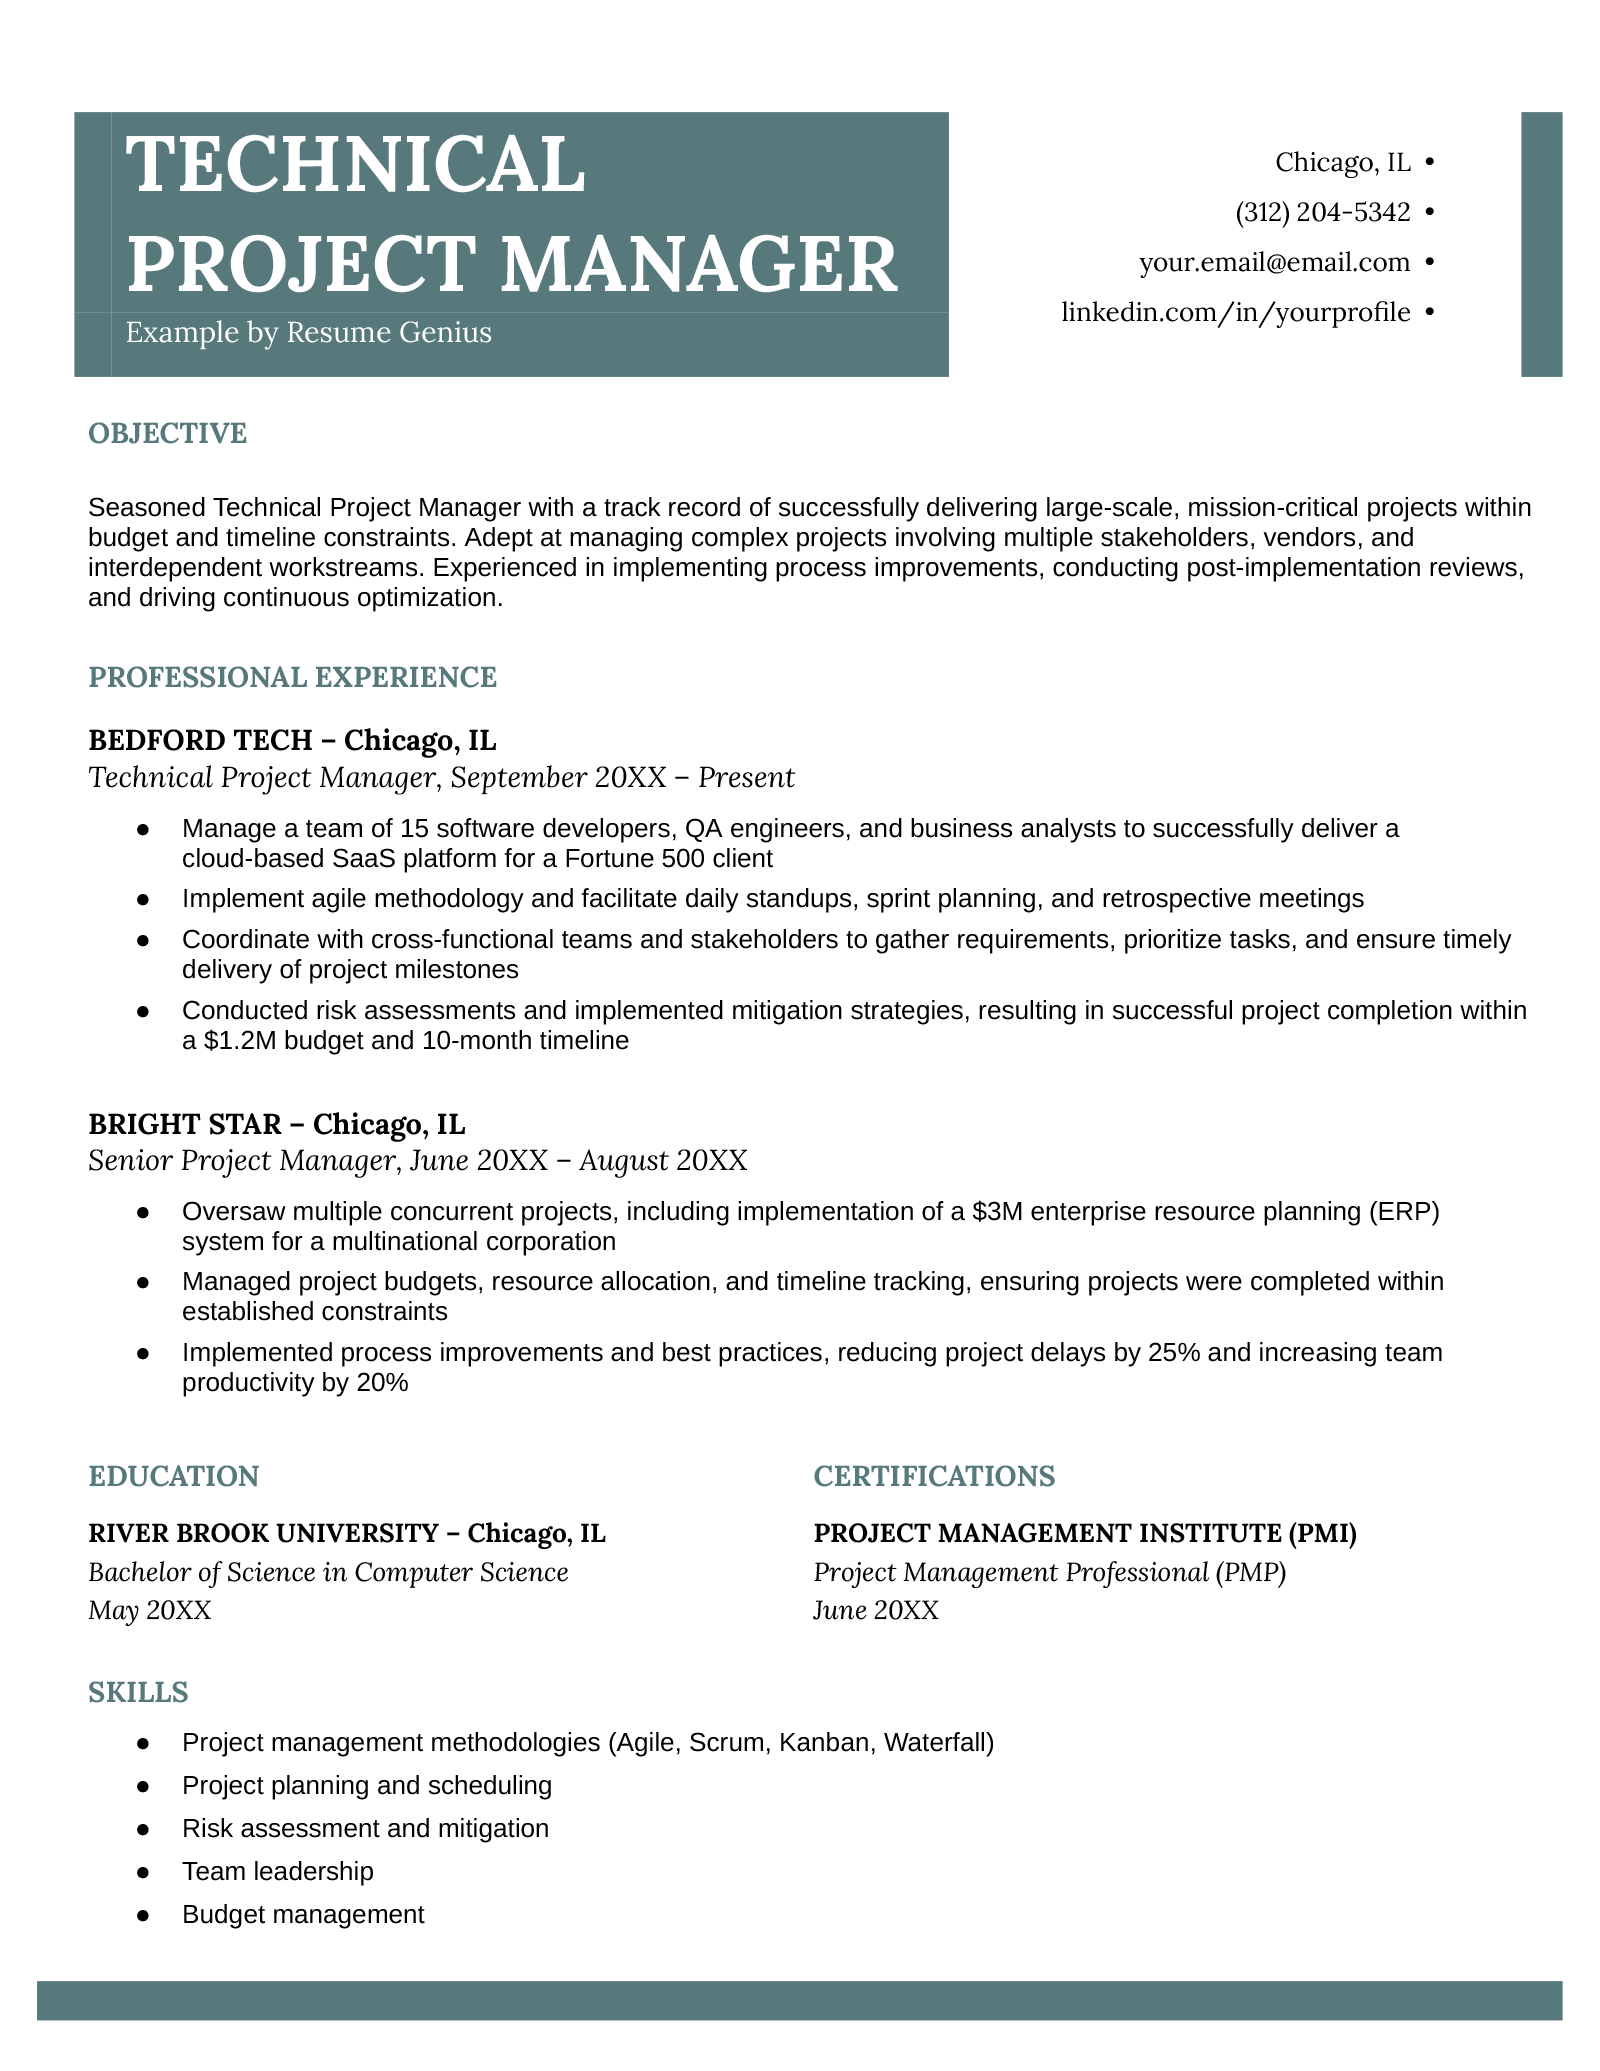 An example resume for a technical project manager.